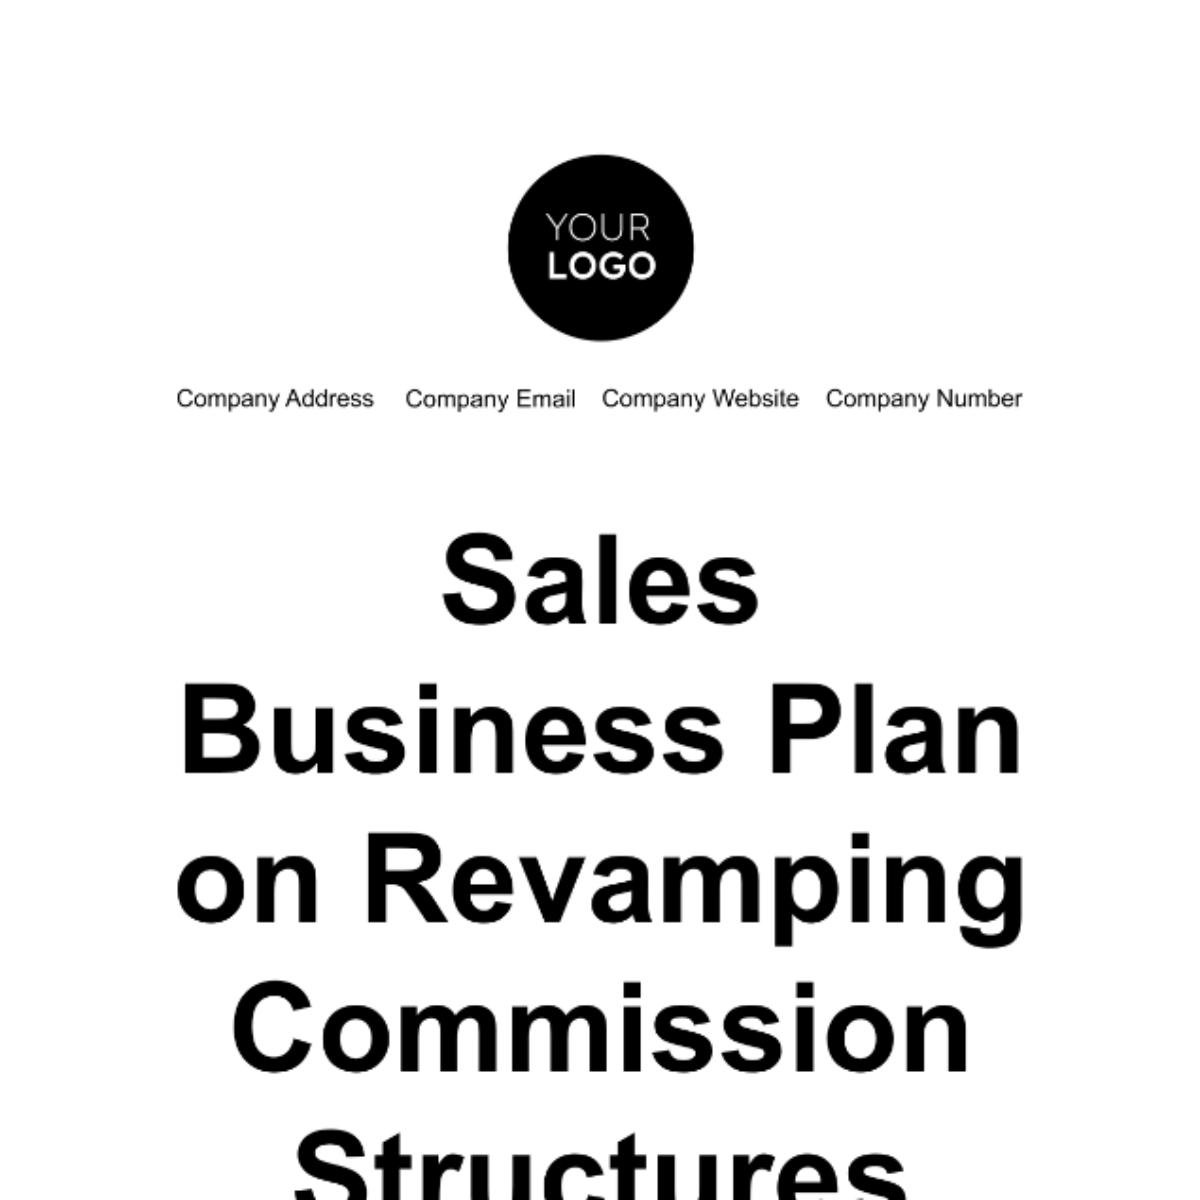 Free Sales Business Plan on Revamping Commission Structures Template